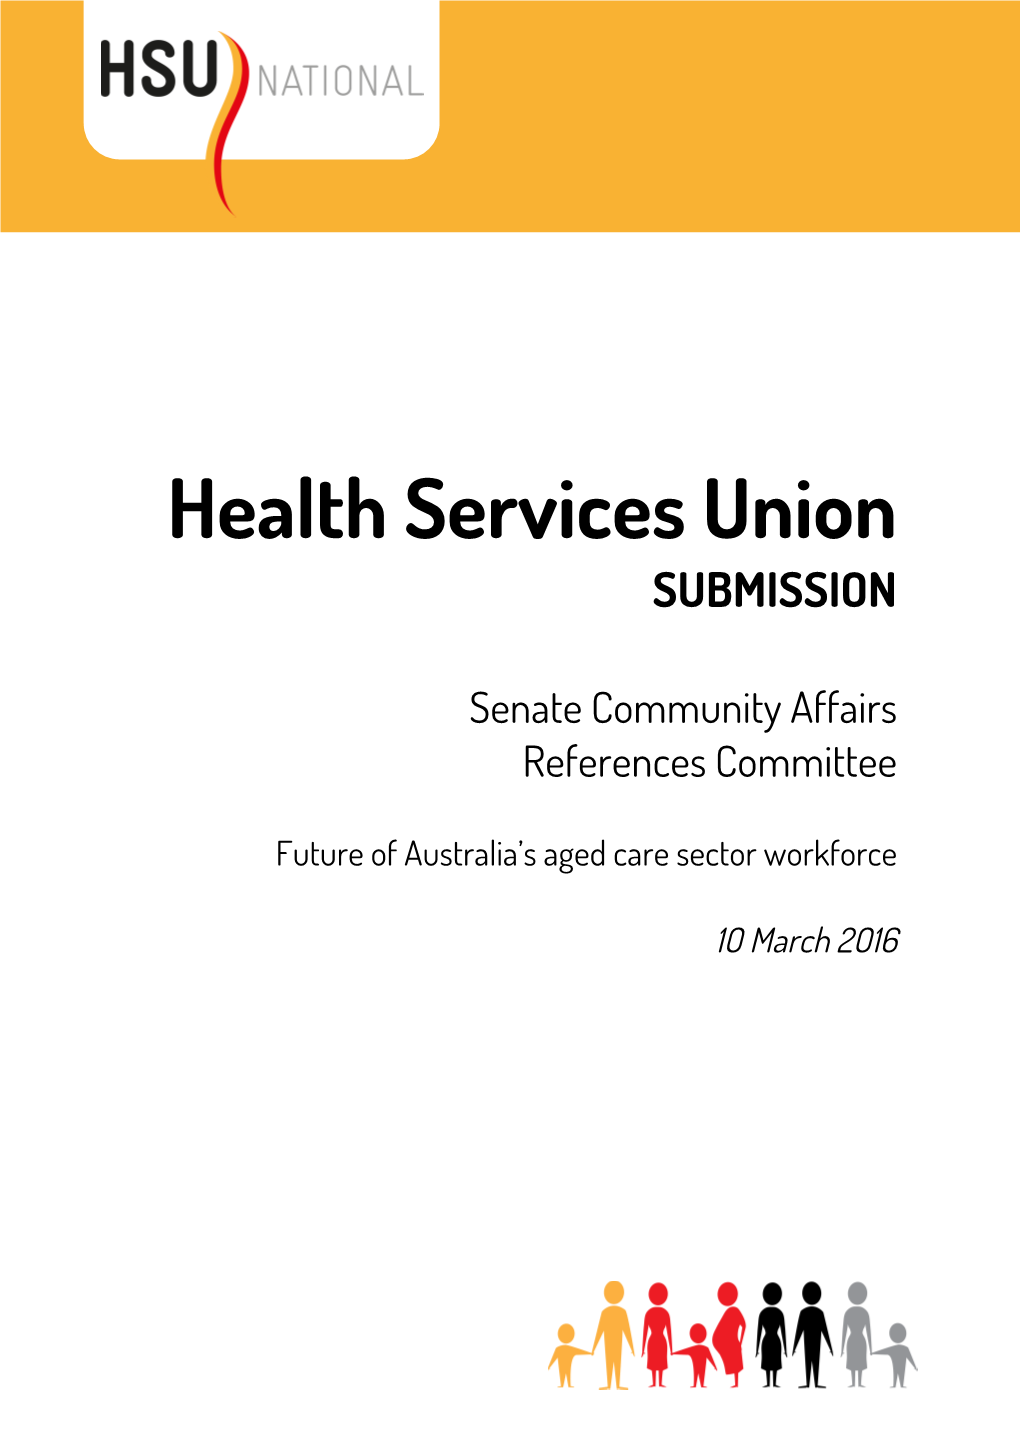 Health Services Union SUBMISSION